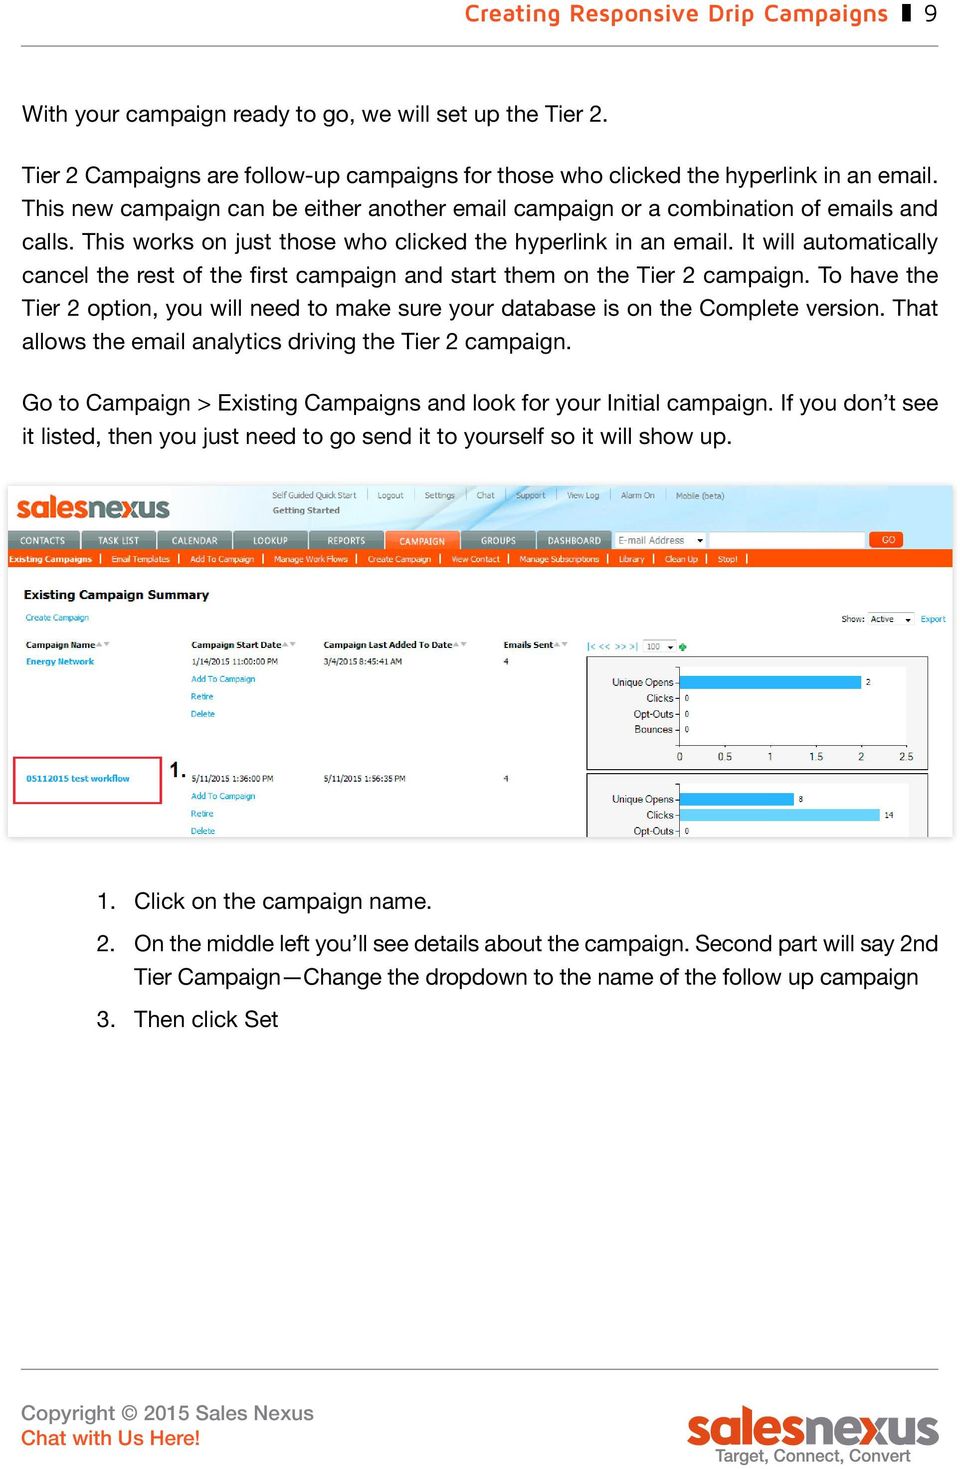 It will automatically cancel the rest of the first campaign and start them on the Tier 2 campaign. To have the Tier 2 option, you will need to make sure your database is on the Complete version.